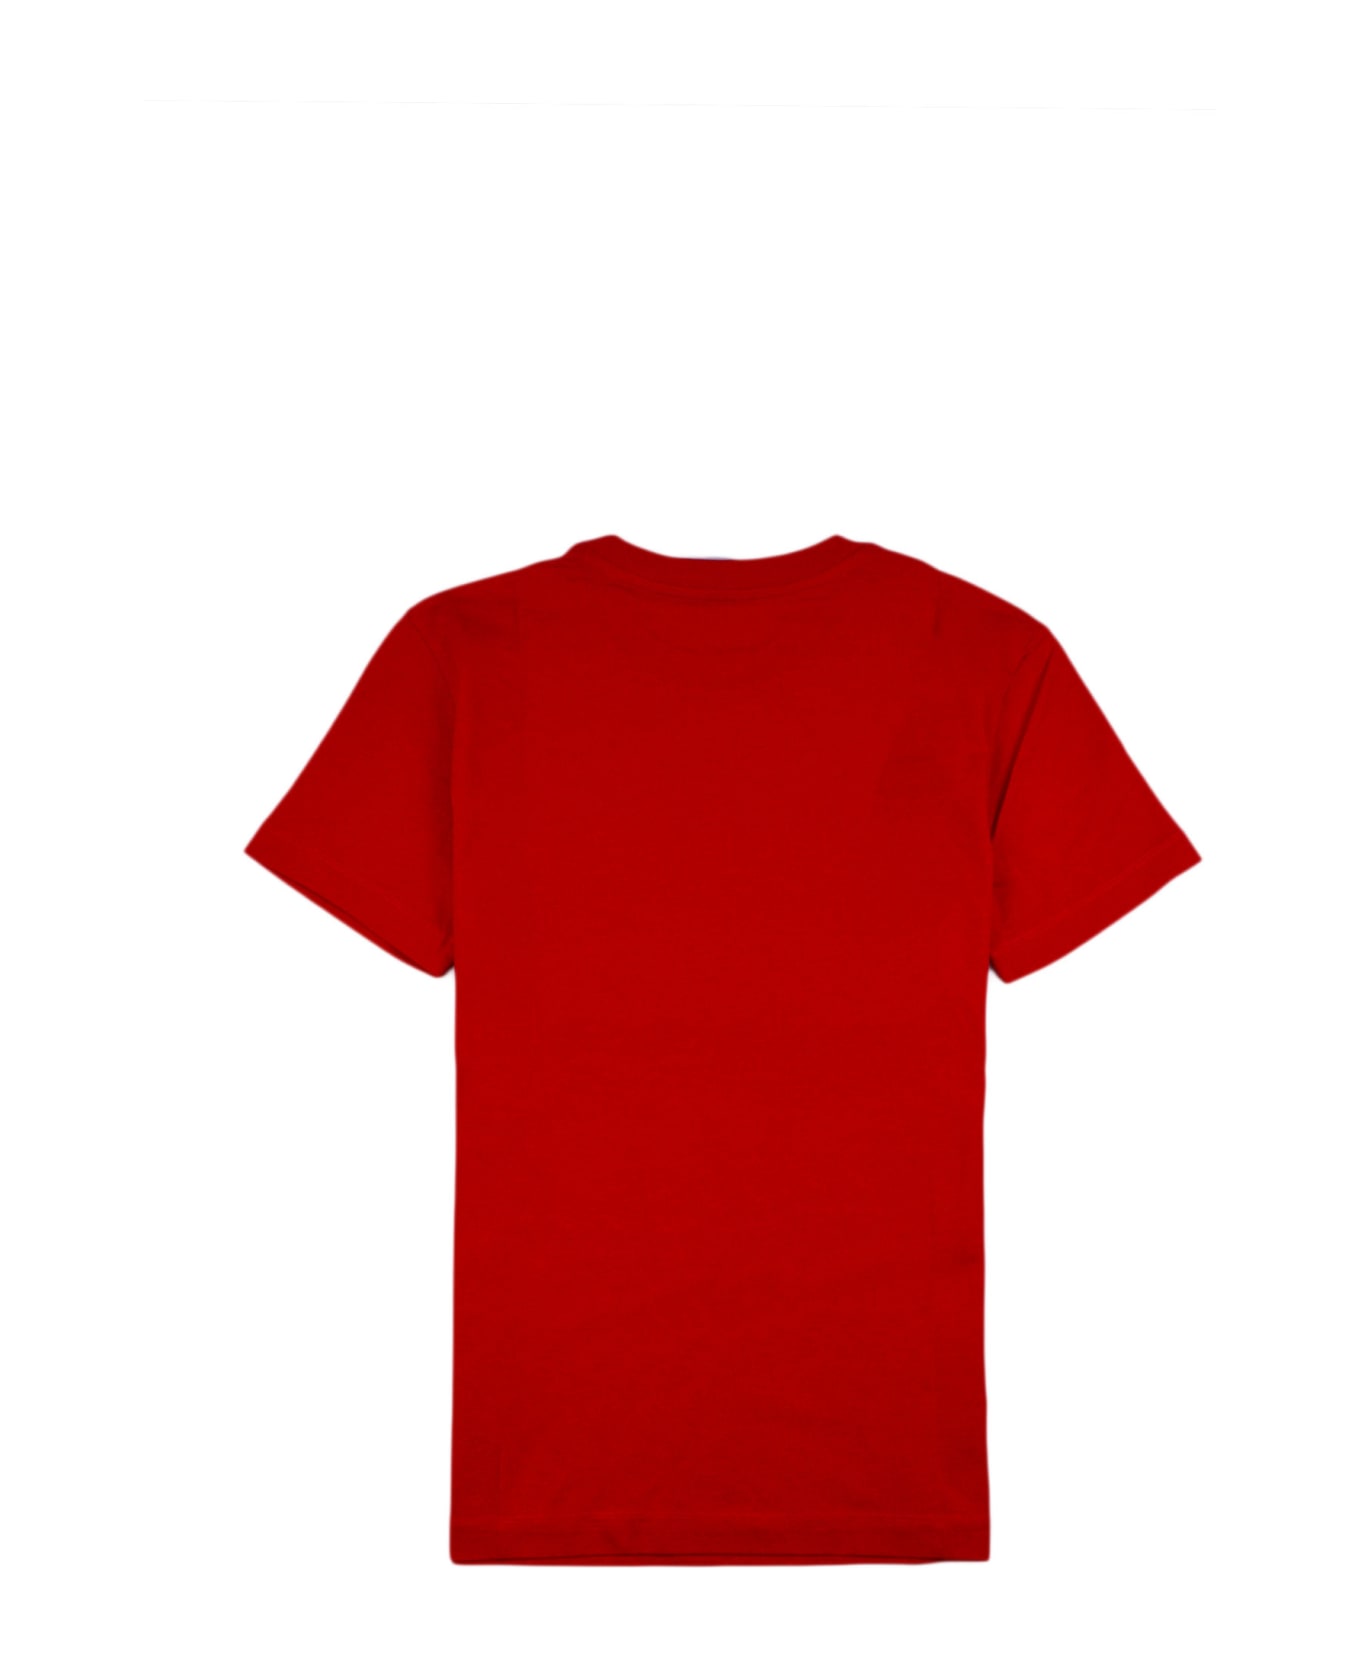 Patou T-shirt - RED Tシャツ